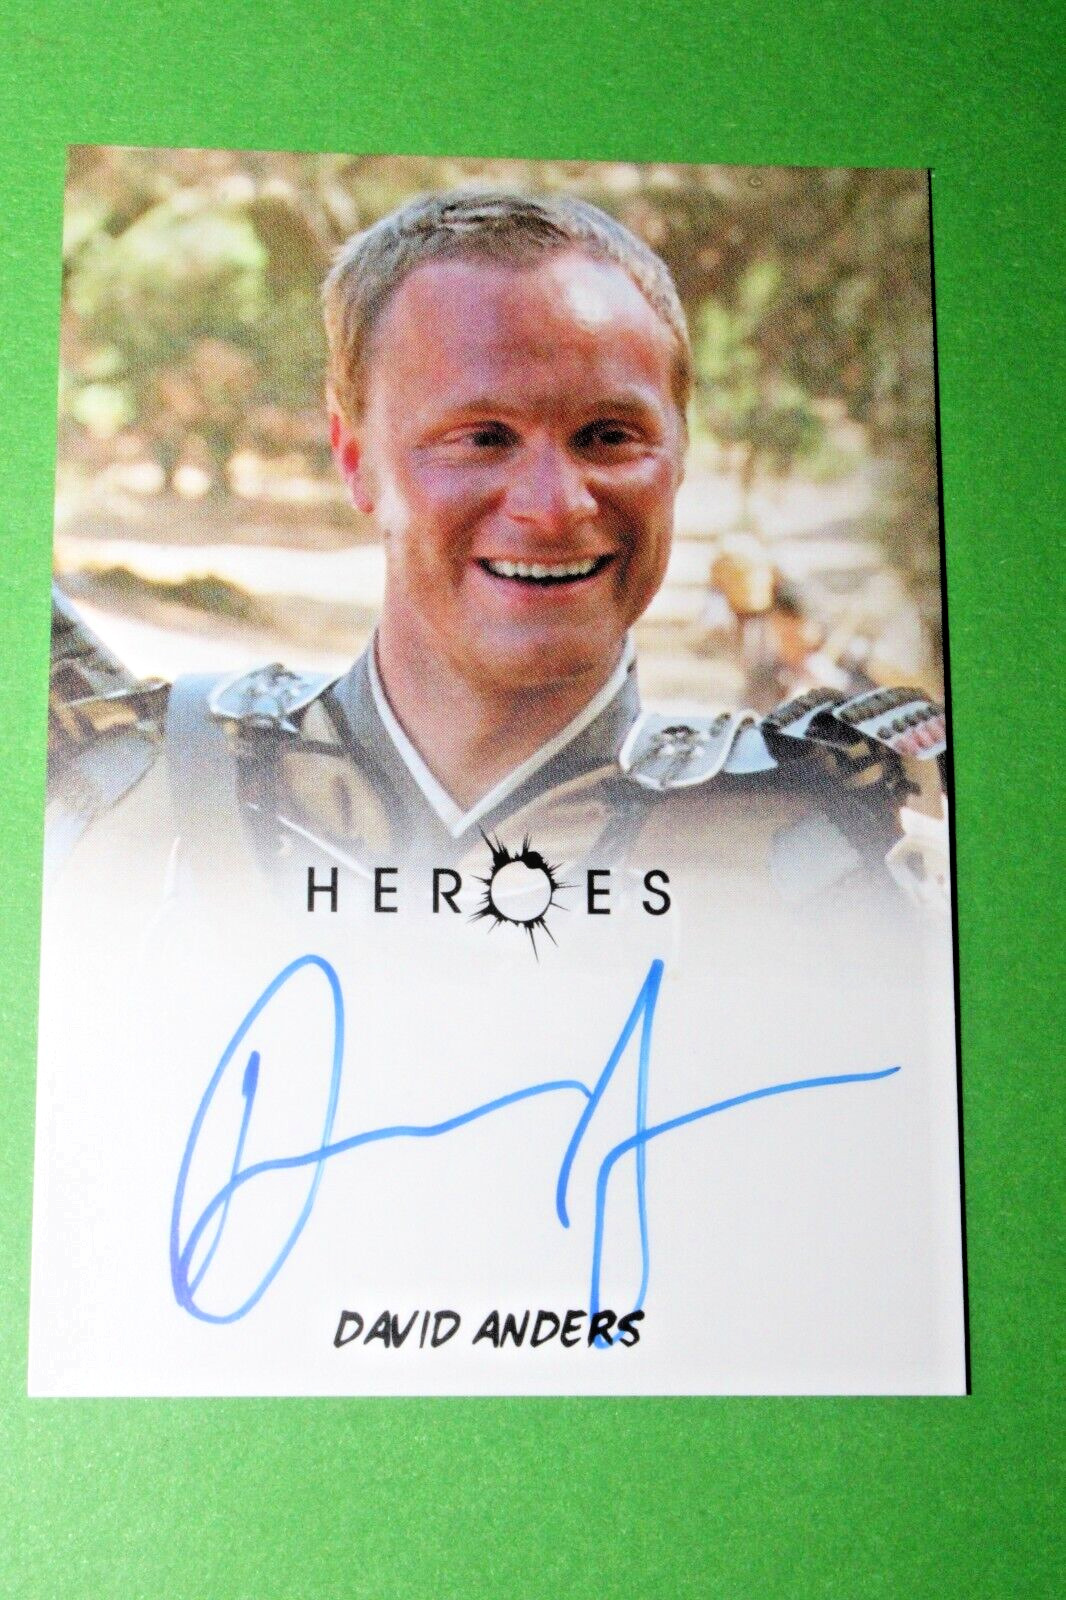 2010 Rittenhouse Heroes ARCHIVES TV Show David Anders Autographed INSERT Card